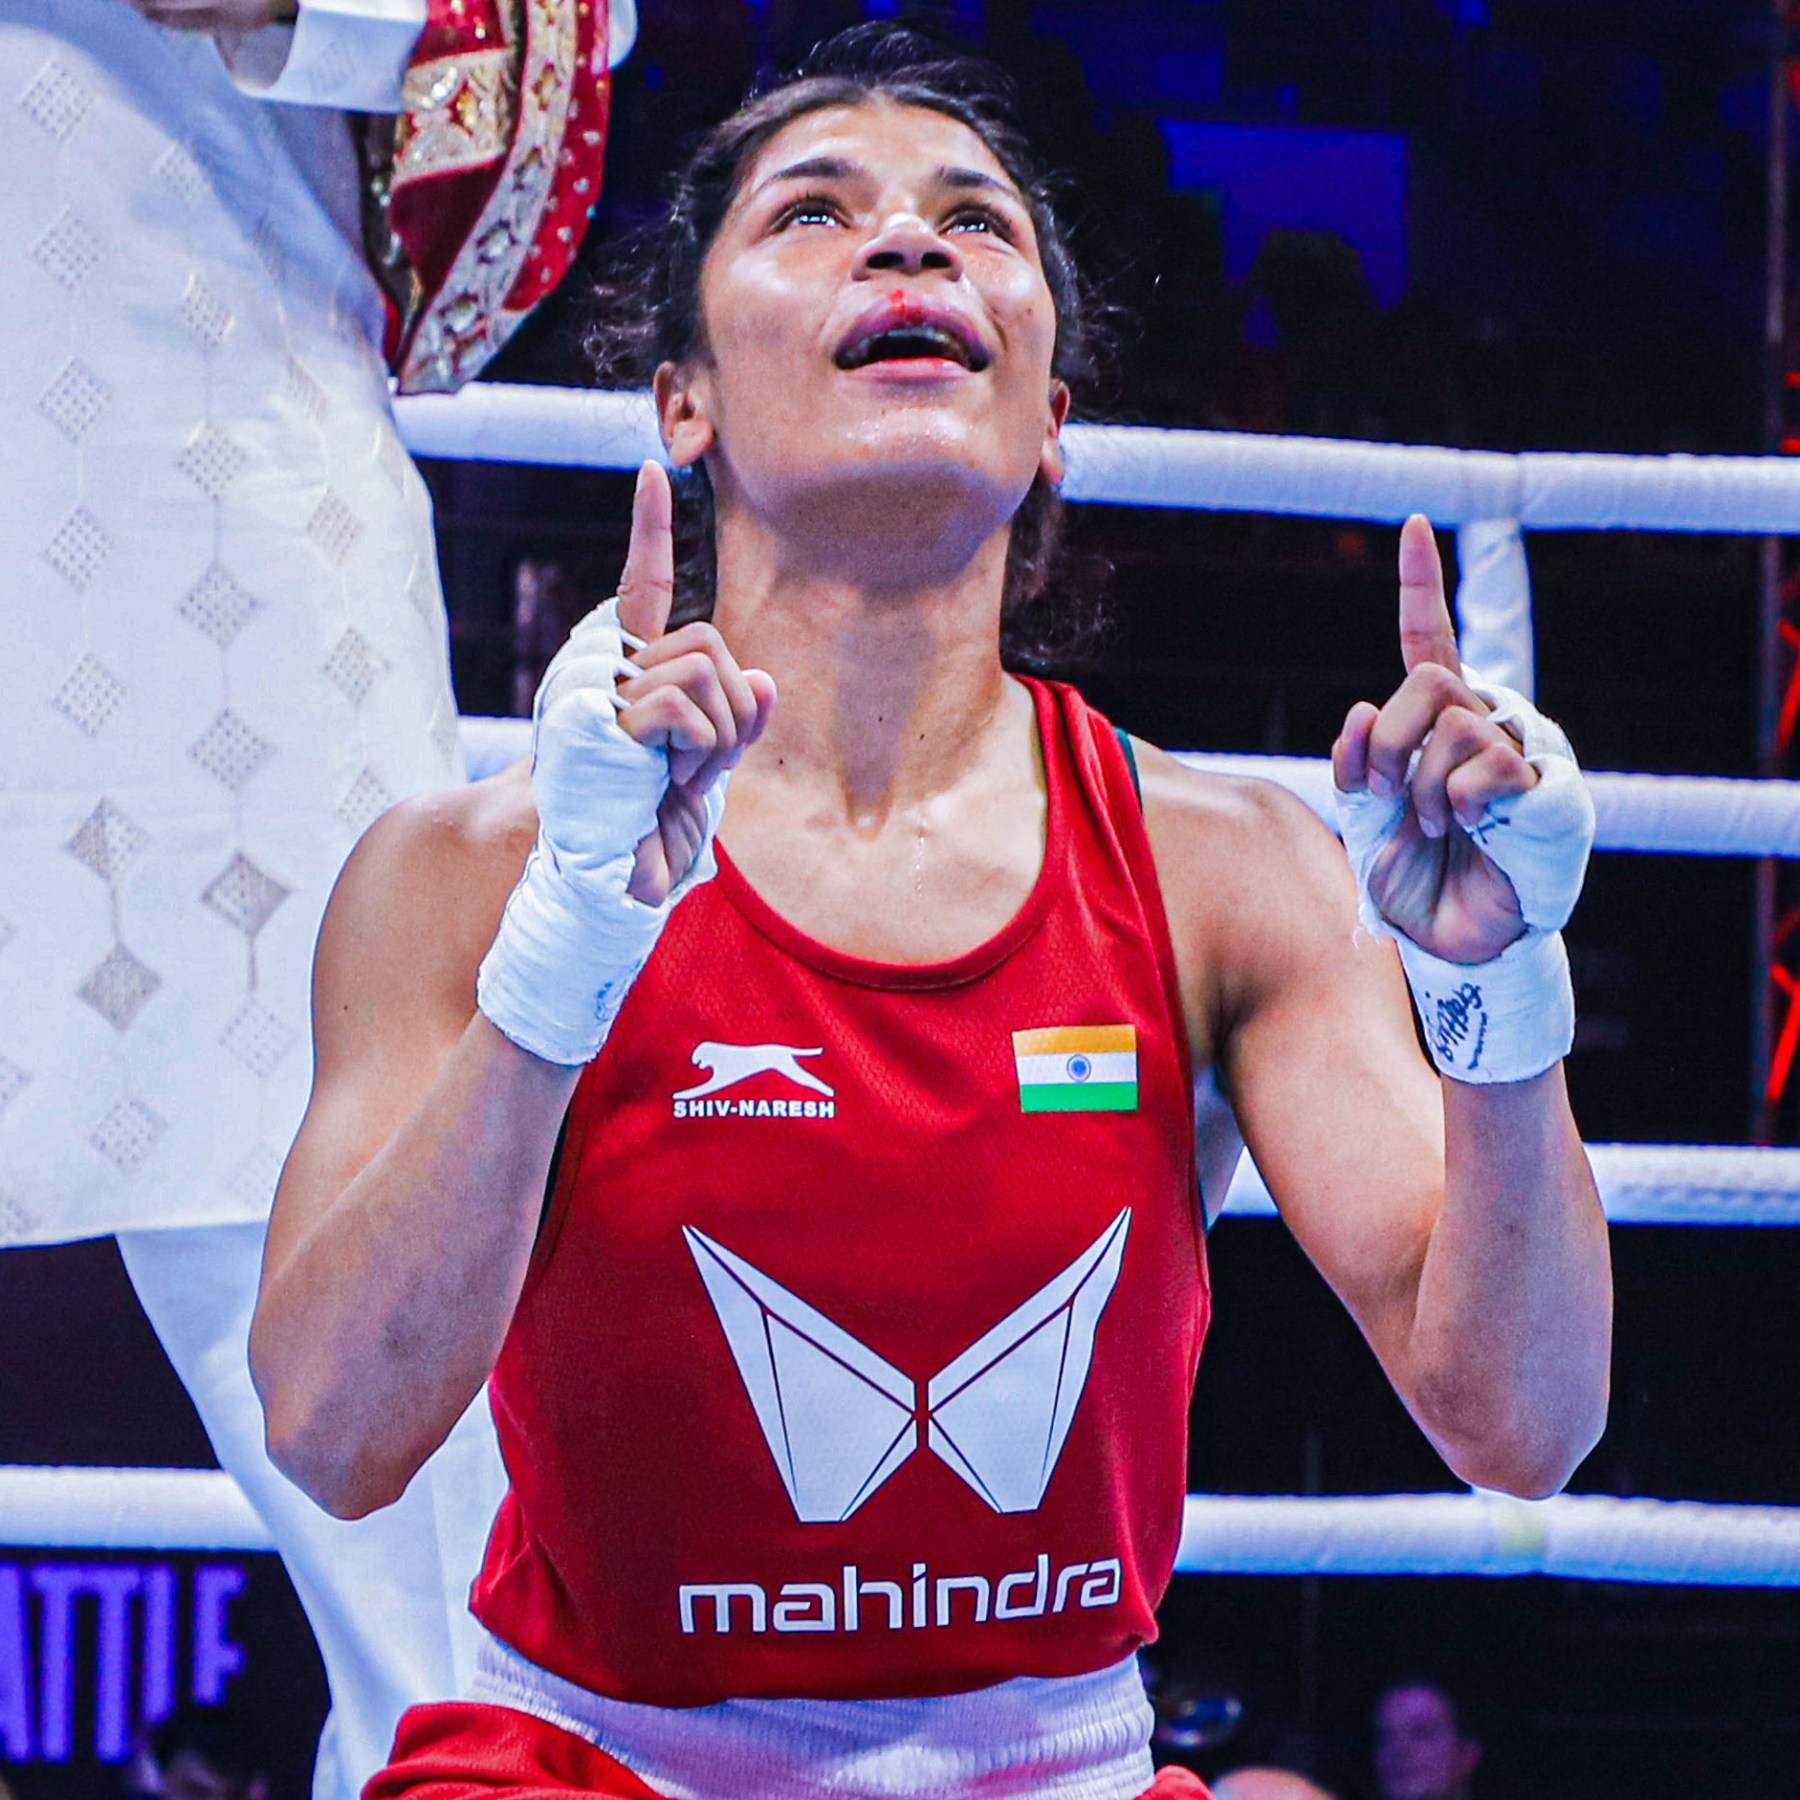 https://www.aljazeera.com/wp-content/uploads/2023/03/Nikhat-became-a-two-time-World-Champion-after-winning-in-the-finals-of-the-Mahindra-IBA-Womens-World-Boxing-Championships-2023-1.jpg?resize=1800%2C1800